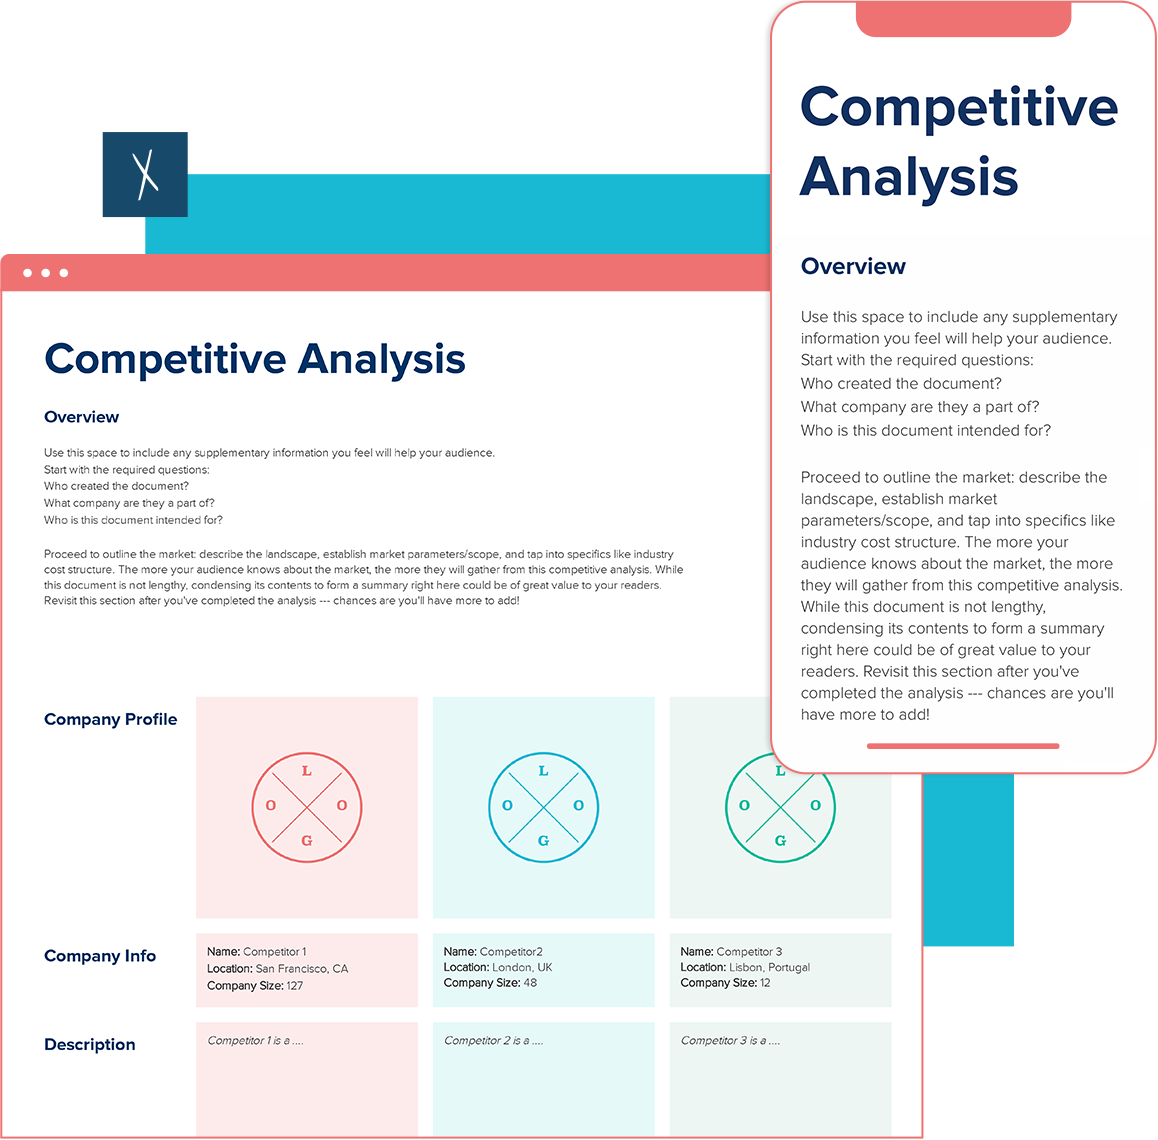 Competitive Analysis Template | Desktop And Mobile Views